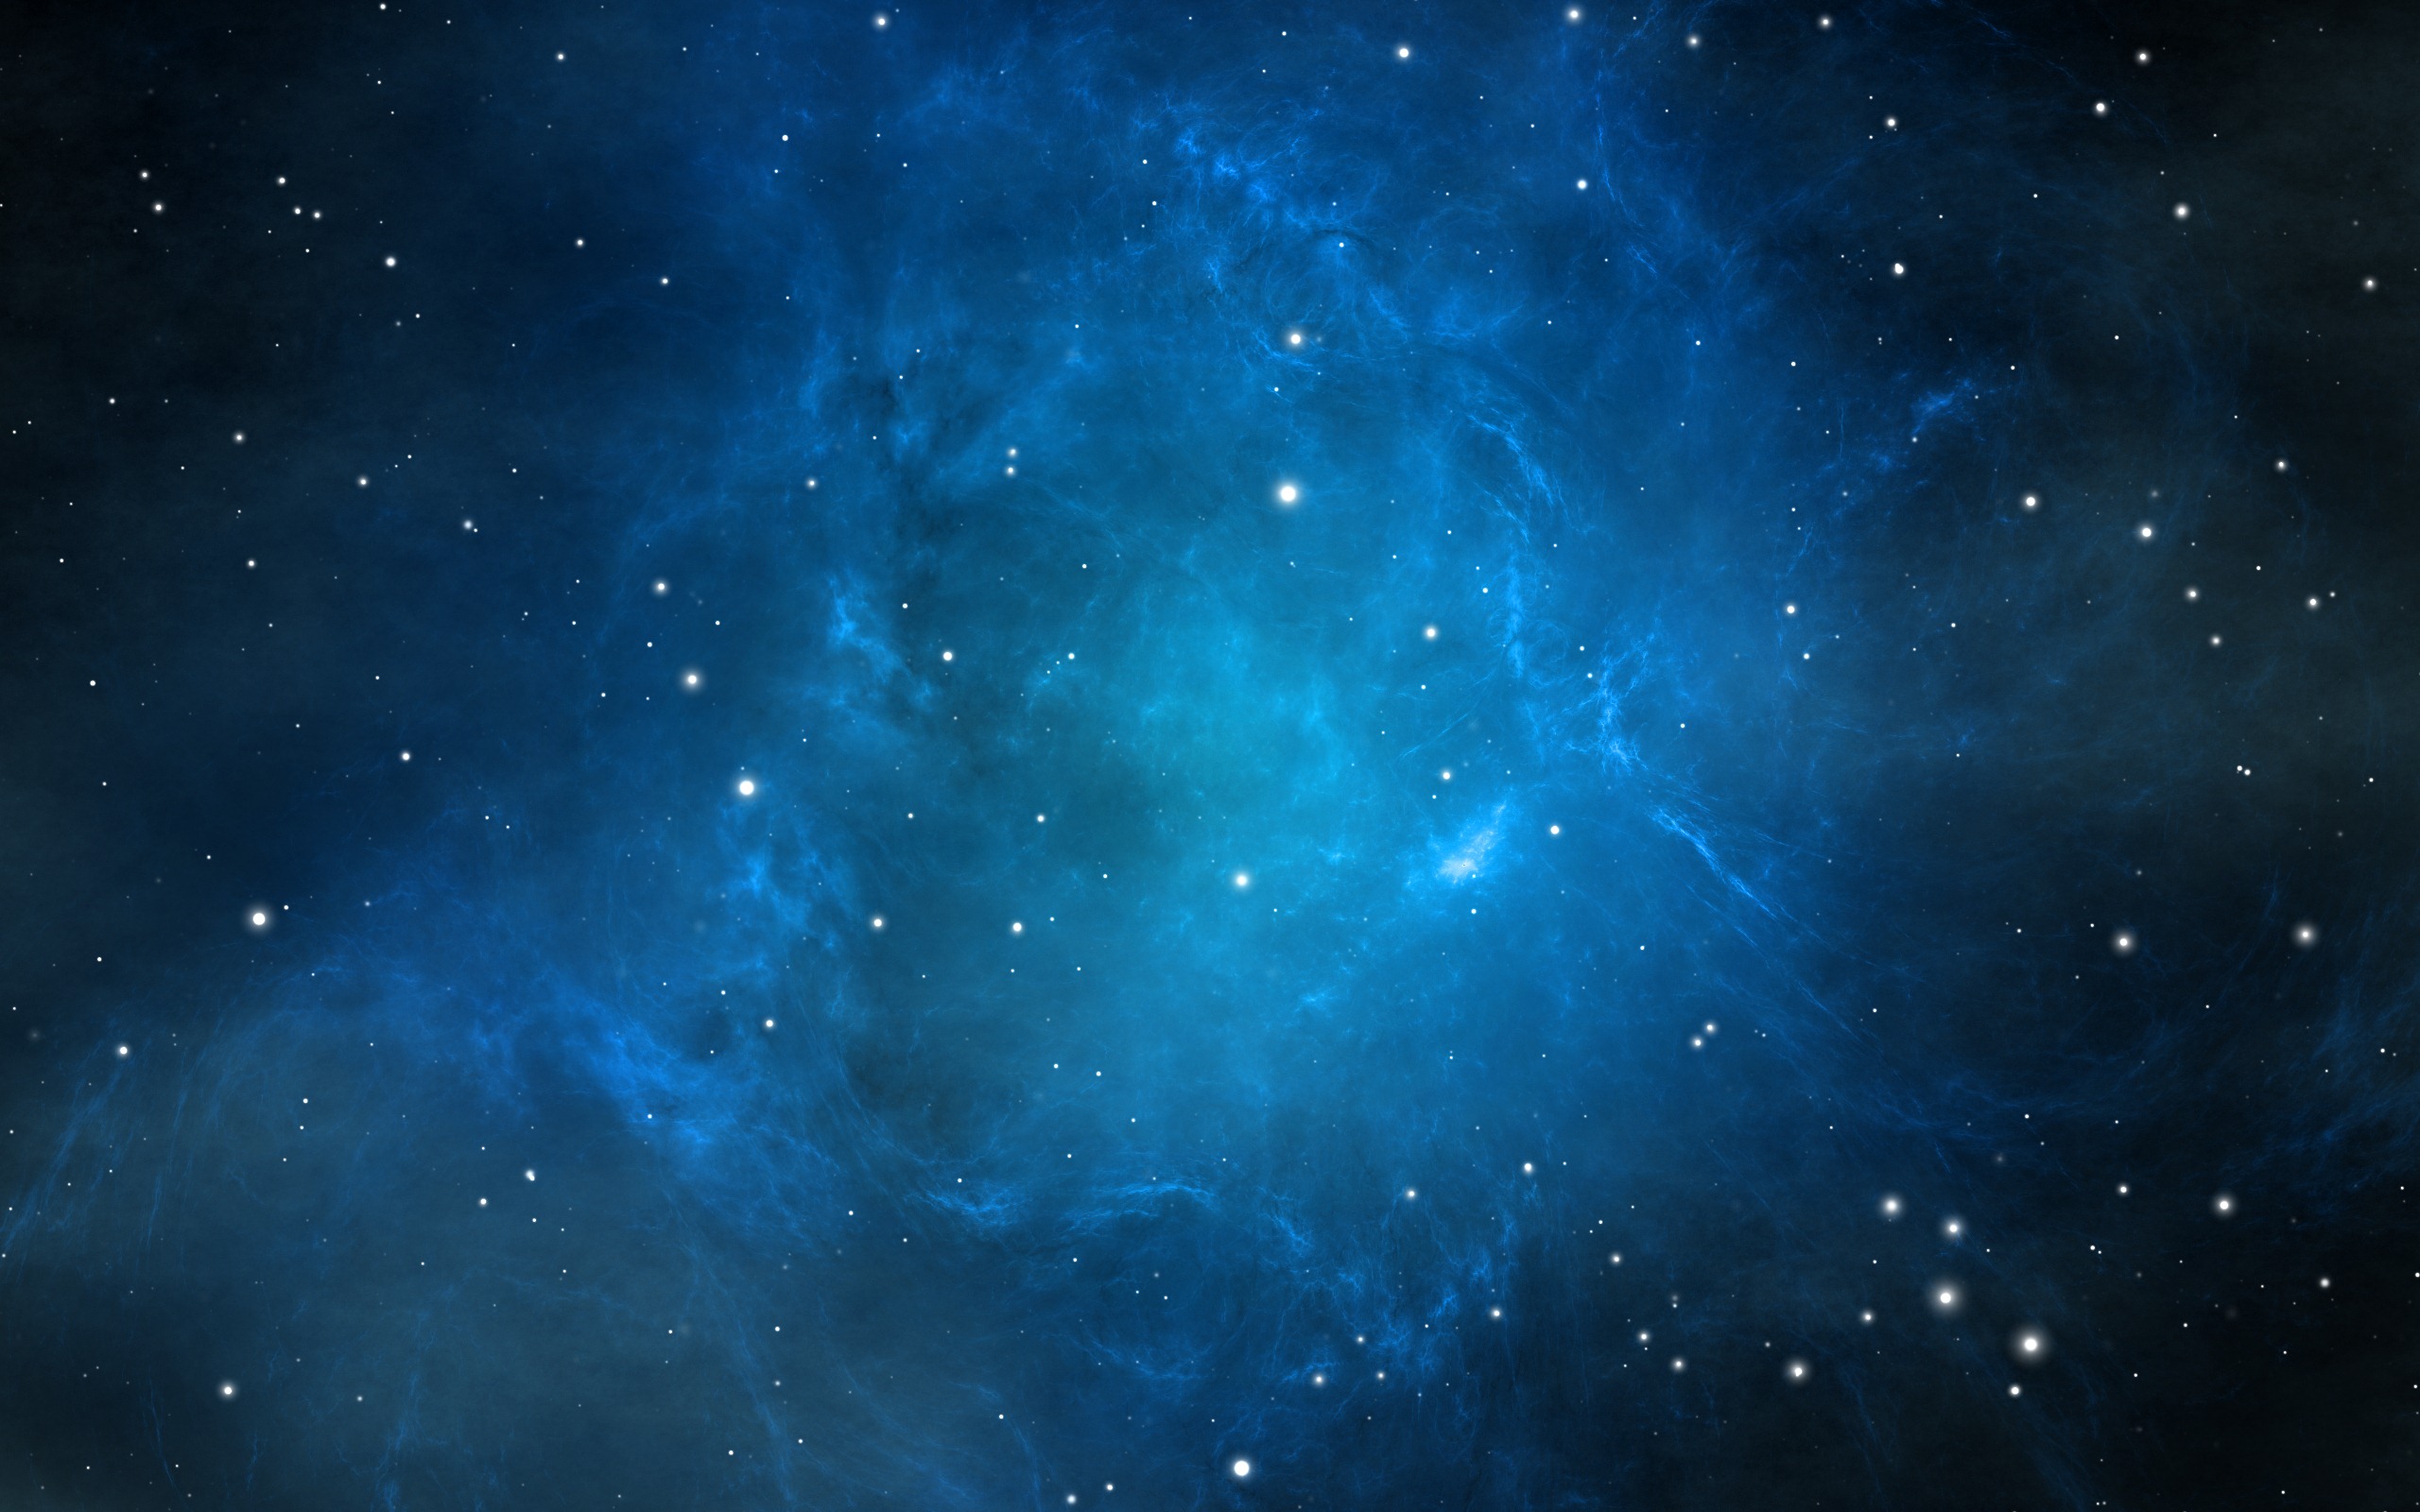 Tumblr Backgrounds Galaxy Star   Pics about space 2560x1600